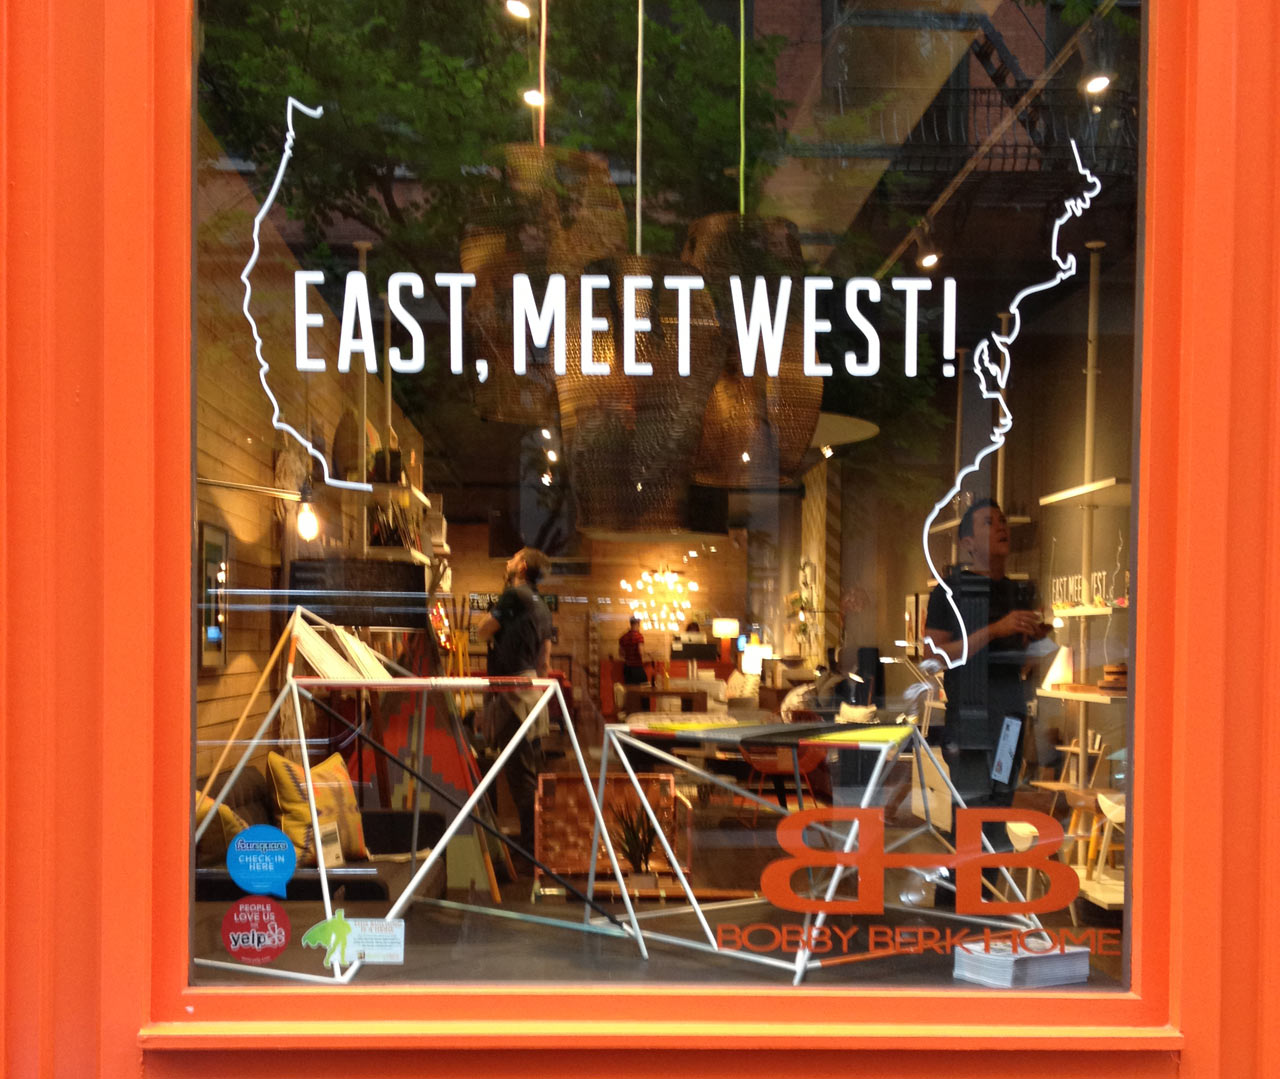 East, Meet West! Popup and Exhibition at Bobby Berk Home